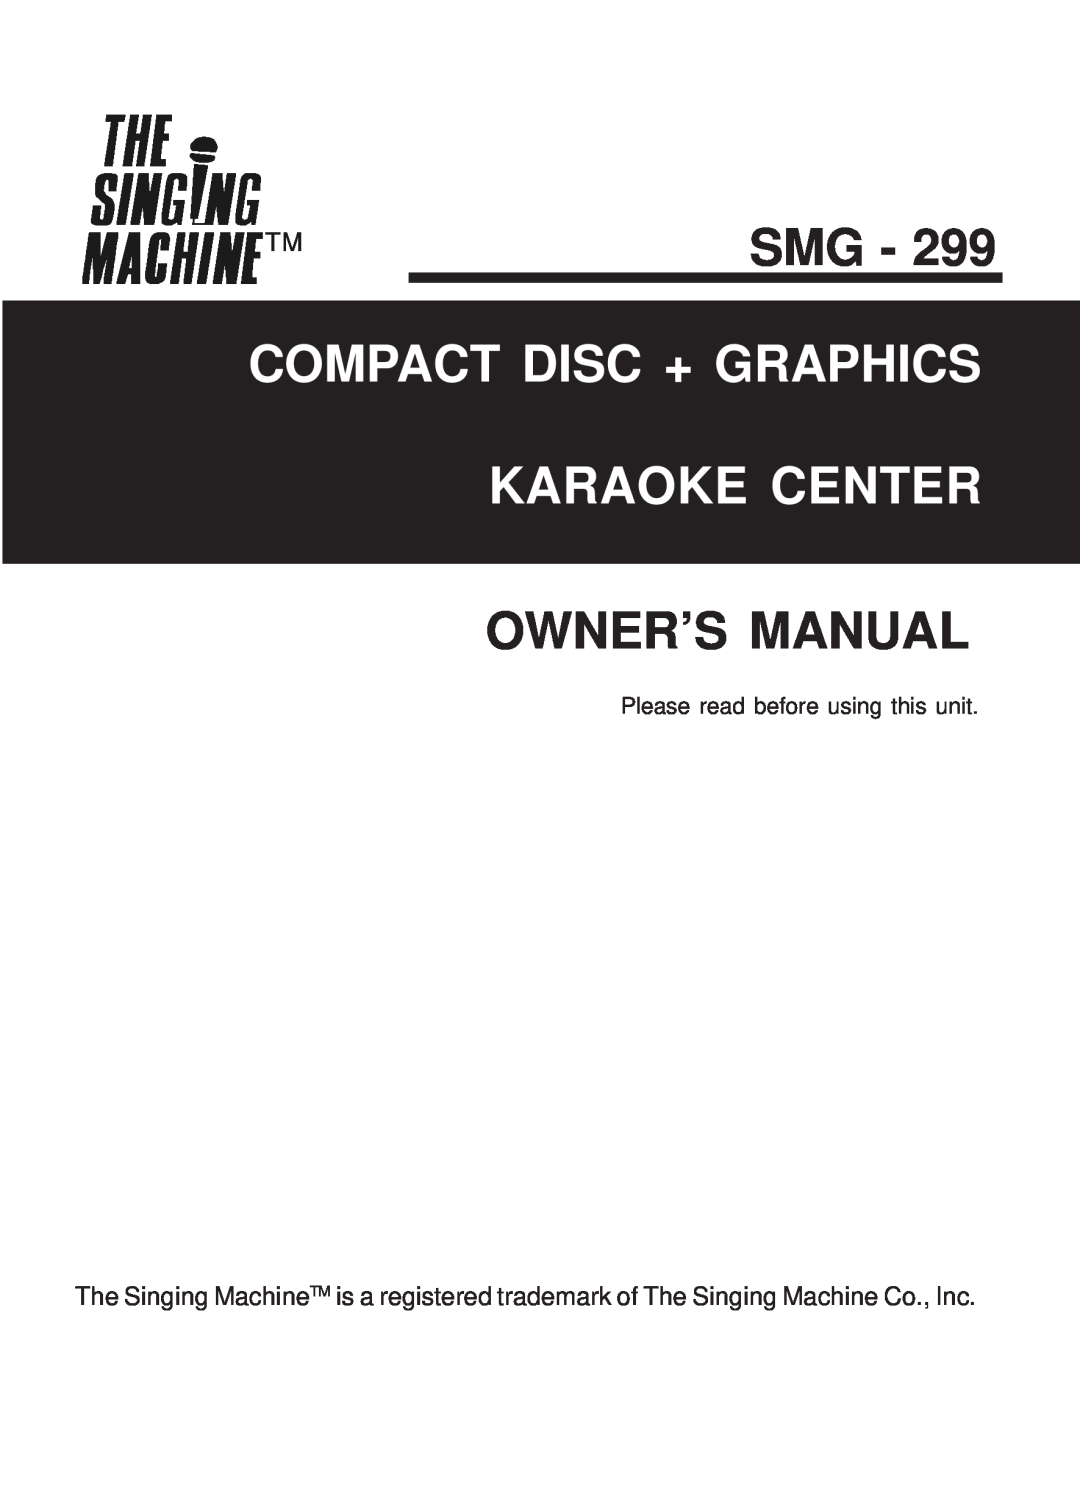 The Singing Machine SMG - 299 owner manual Tmsmg, Compact Disc + Graphics Karaoke Center 